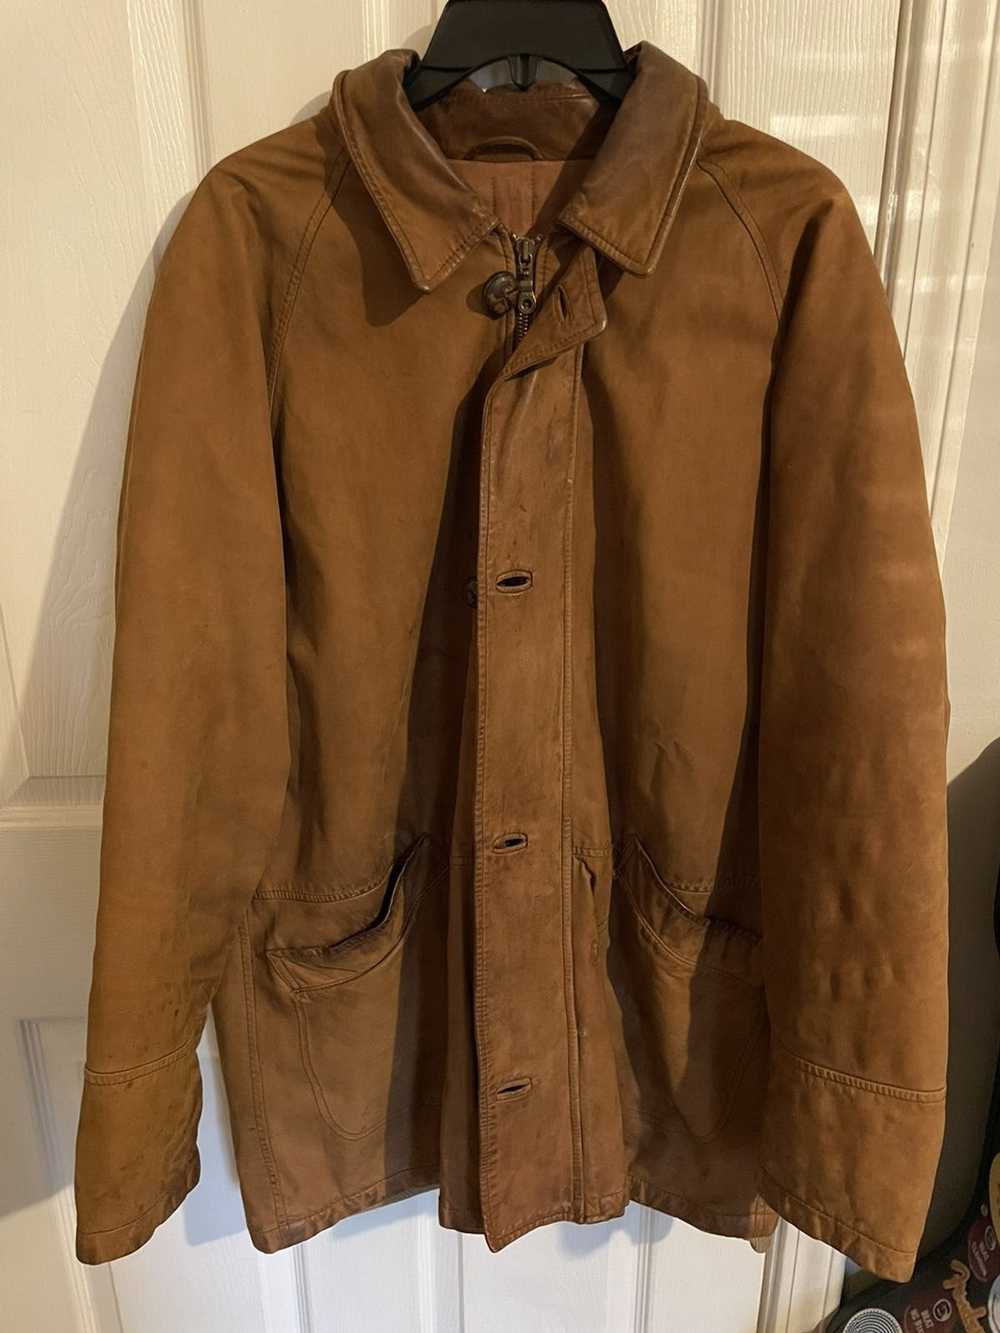 Ysl Pour Homme Light Brown YSL Leather Jacket - image 2